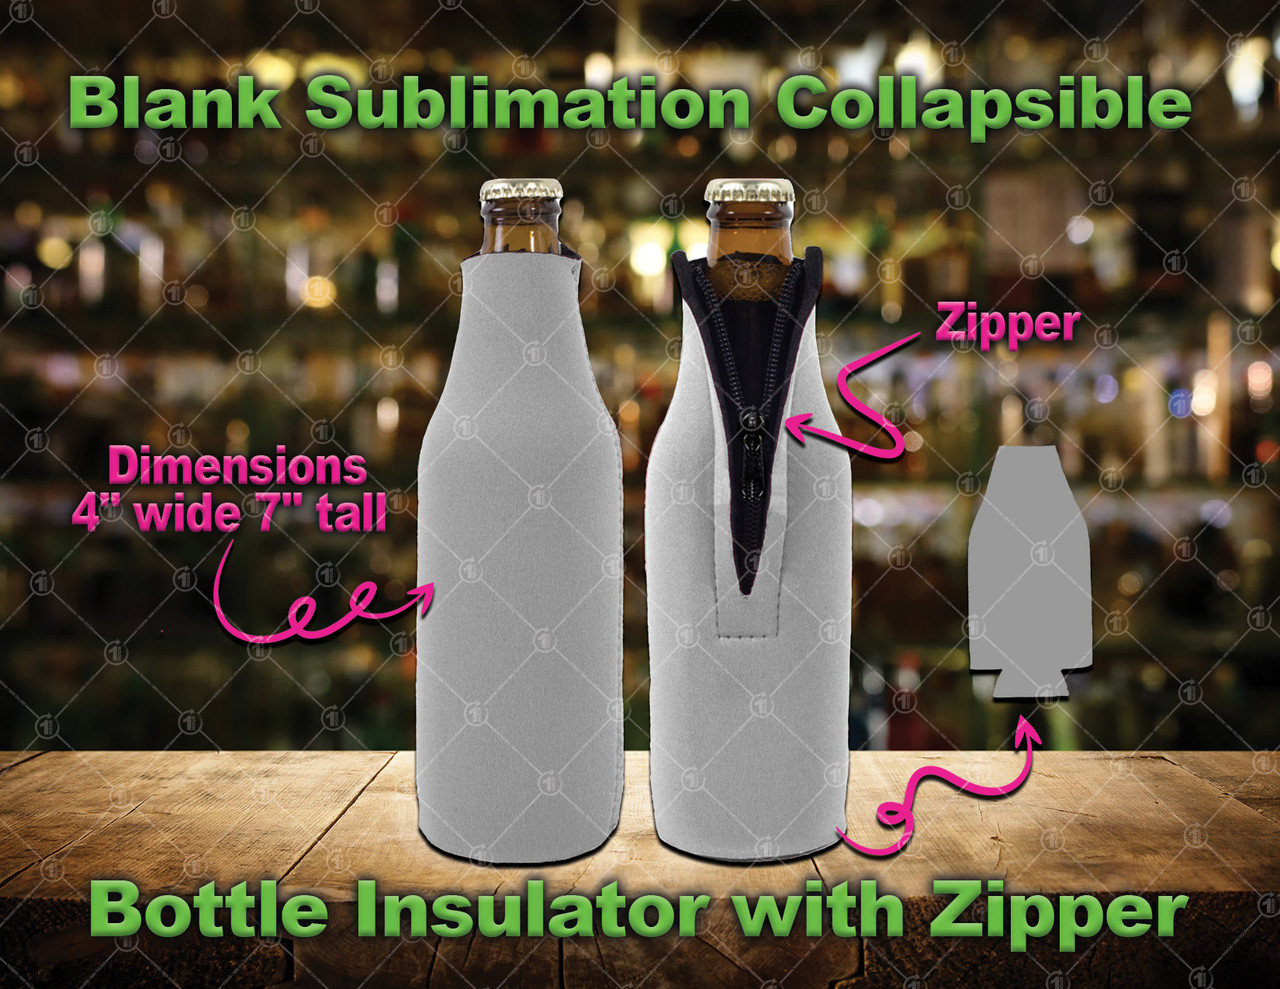 https://cdn11.bigcommerce.com/s-z8z053nf9t/images/stencil/1280x1280/products/1075/2411/Bottle_Insulator_with_zipper_for_sublimation_-_website__79591.1665513198.jpg?c=2